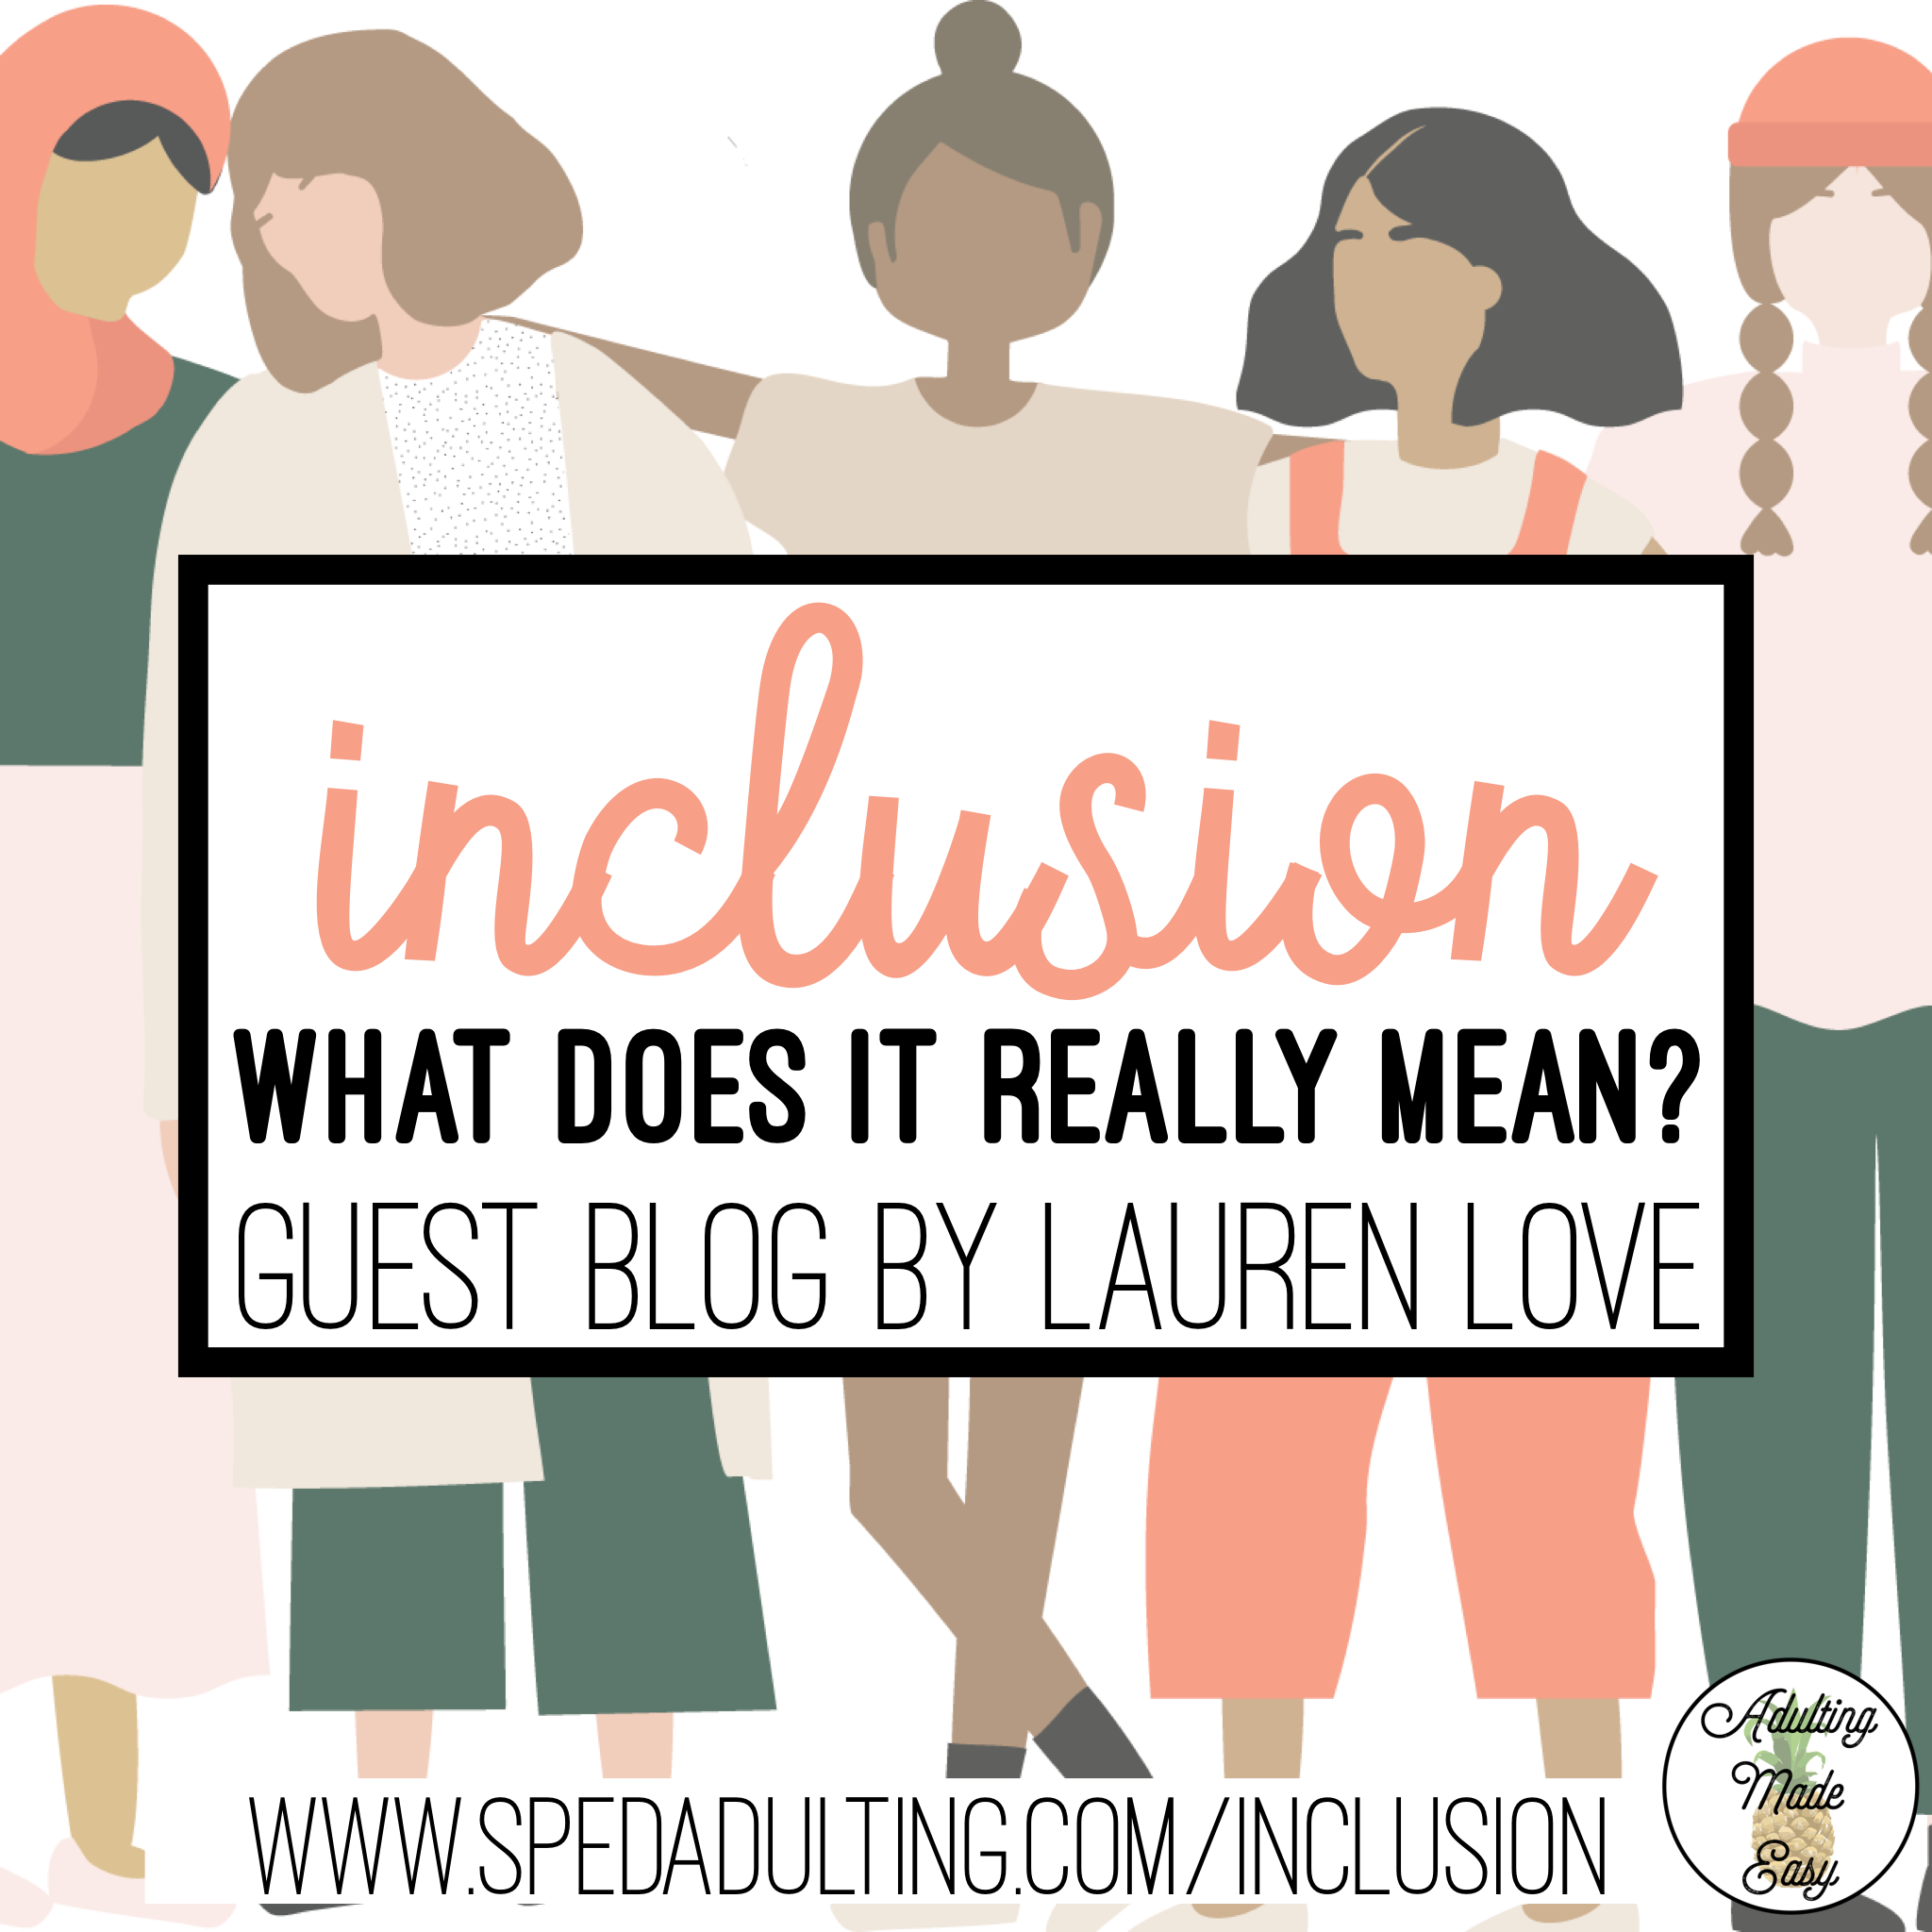 BLOG: INCLUSION, What does it really mean?